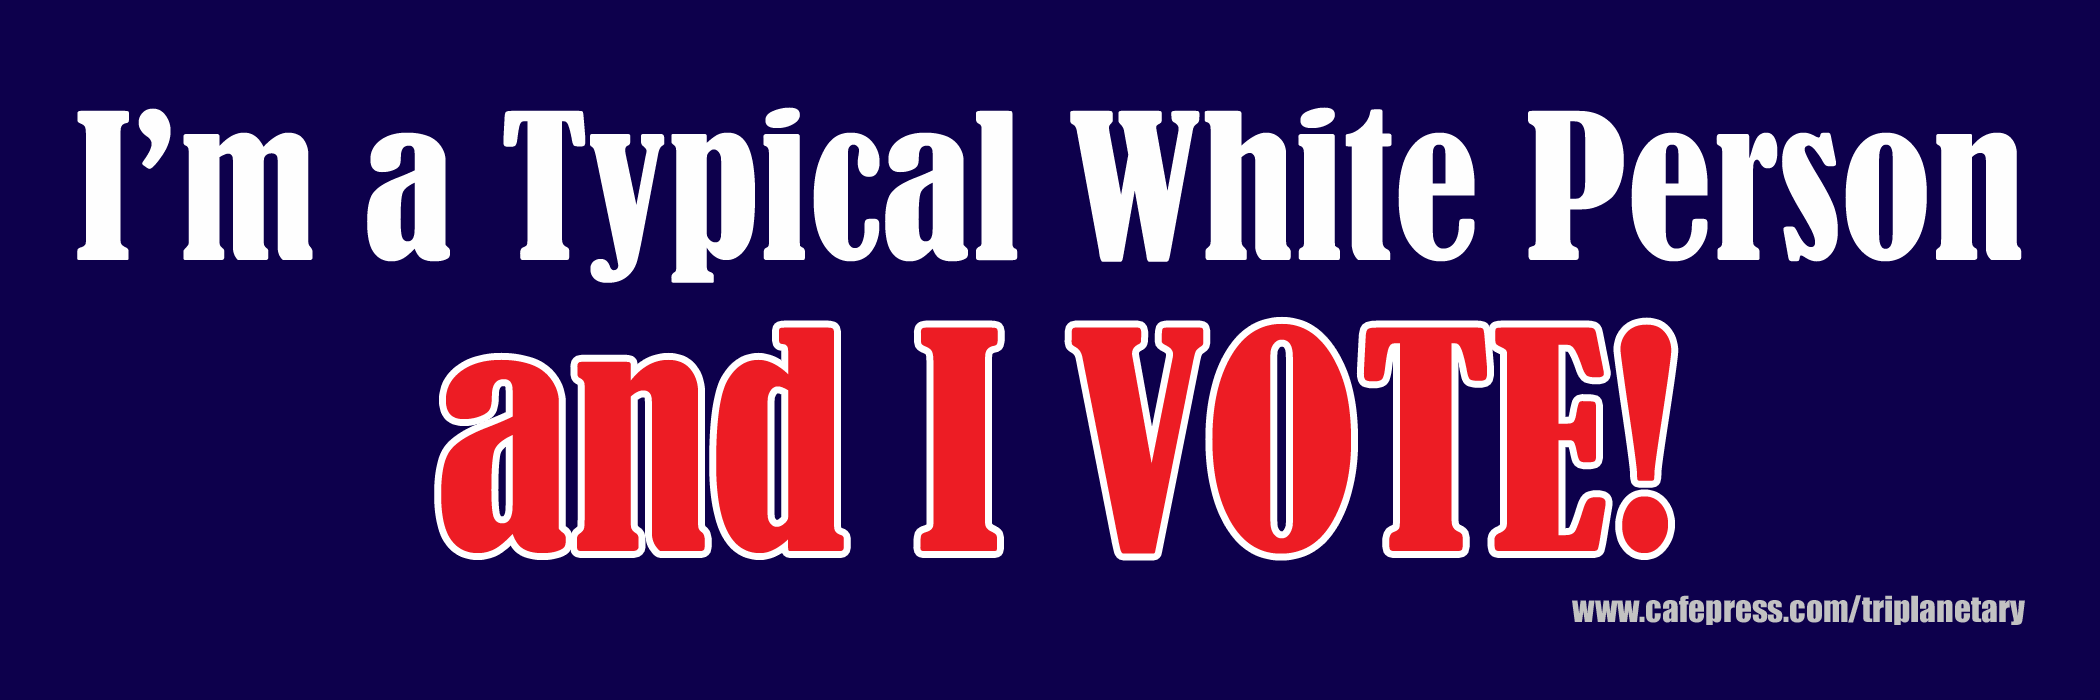 Red, white, and blue image of bumper sticker: 'I'm a Typical White Person and I VOTE!'